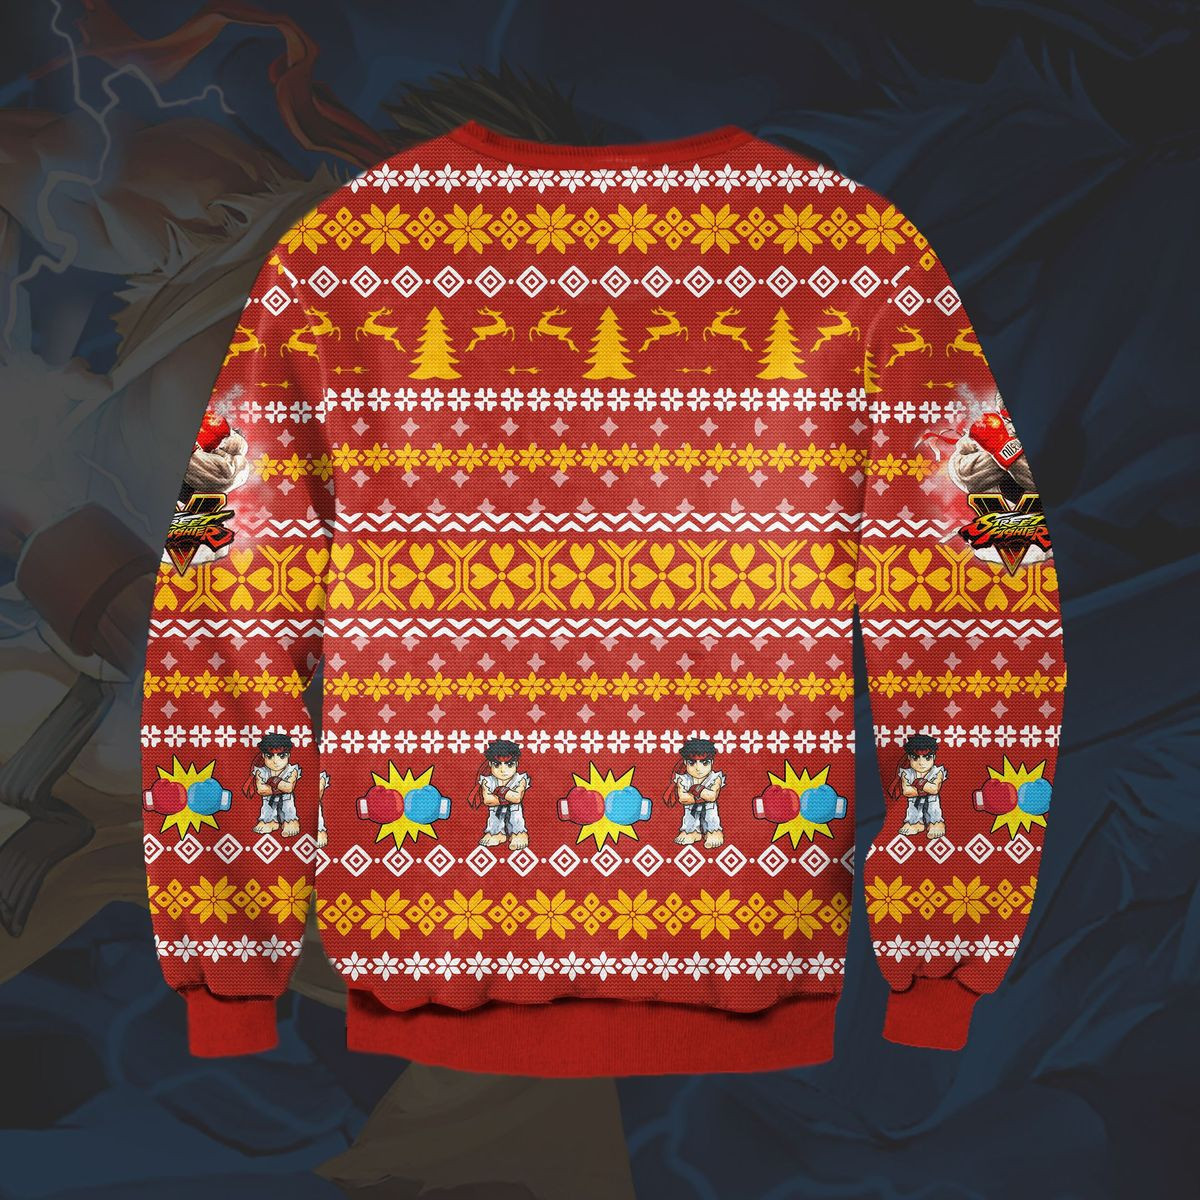 Ryu Street Fighter Christmas Sweater – TXTrend Shop